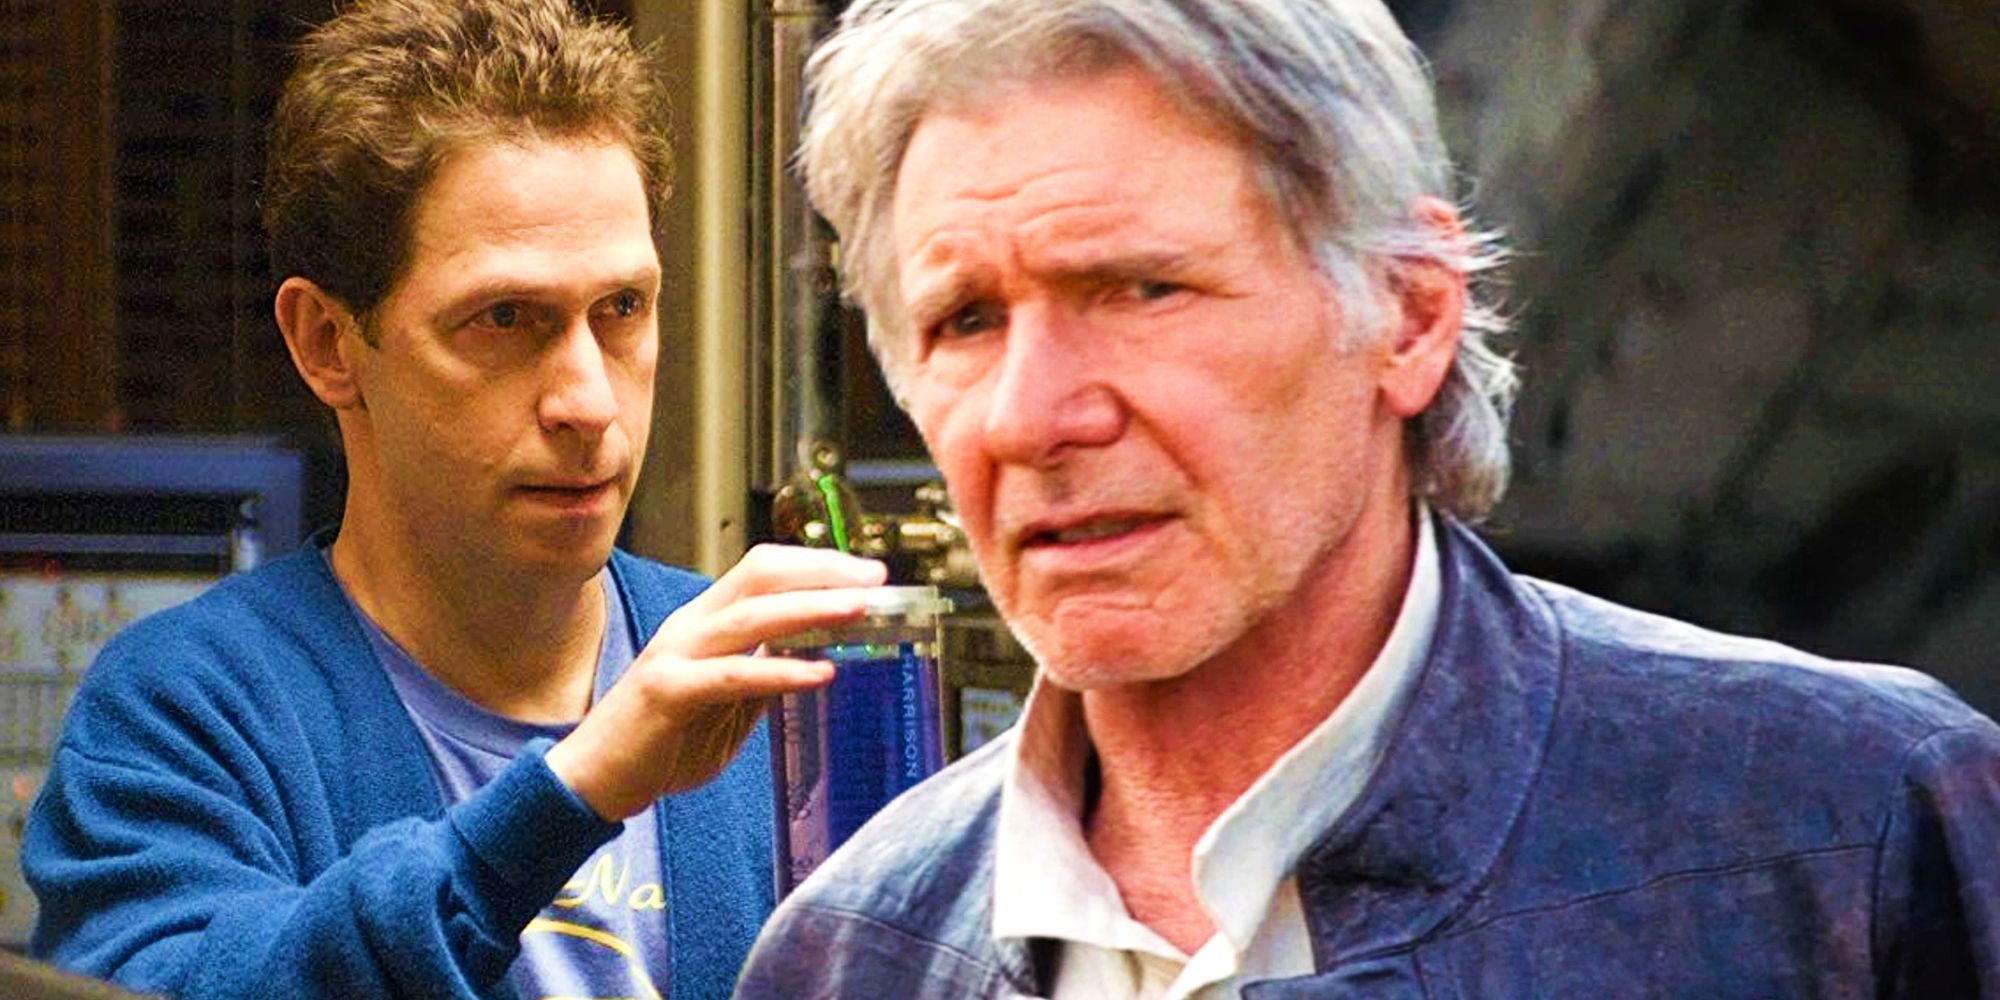 Tim Blake Nelson in The Incredible Hulk and Harrison Ford in The Force Awakens